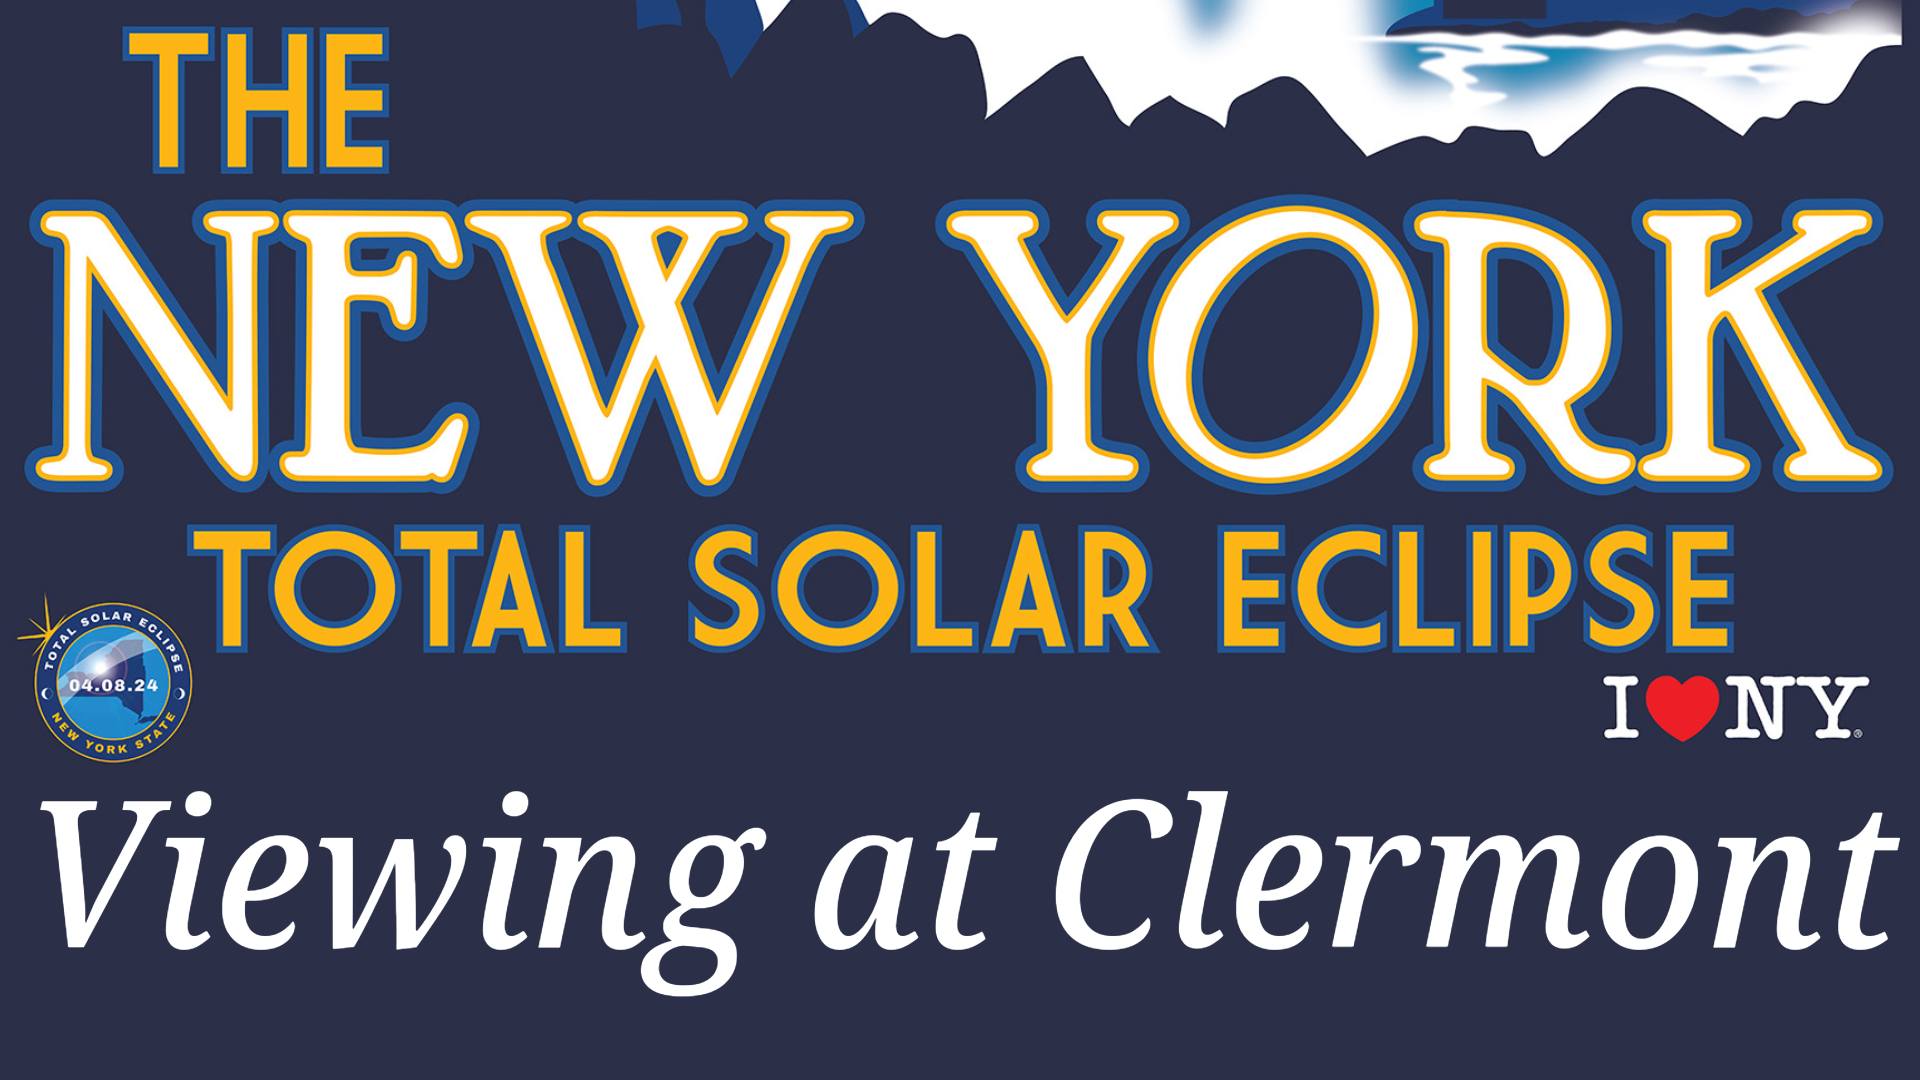 There Goes the Sun: "Watch" the Solar Eclipse at Clermont